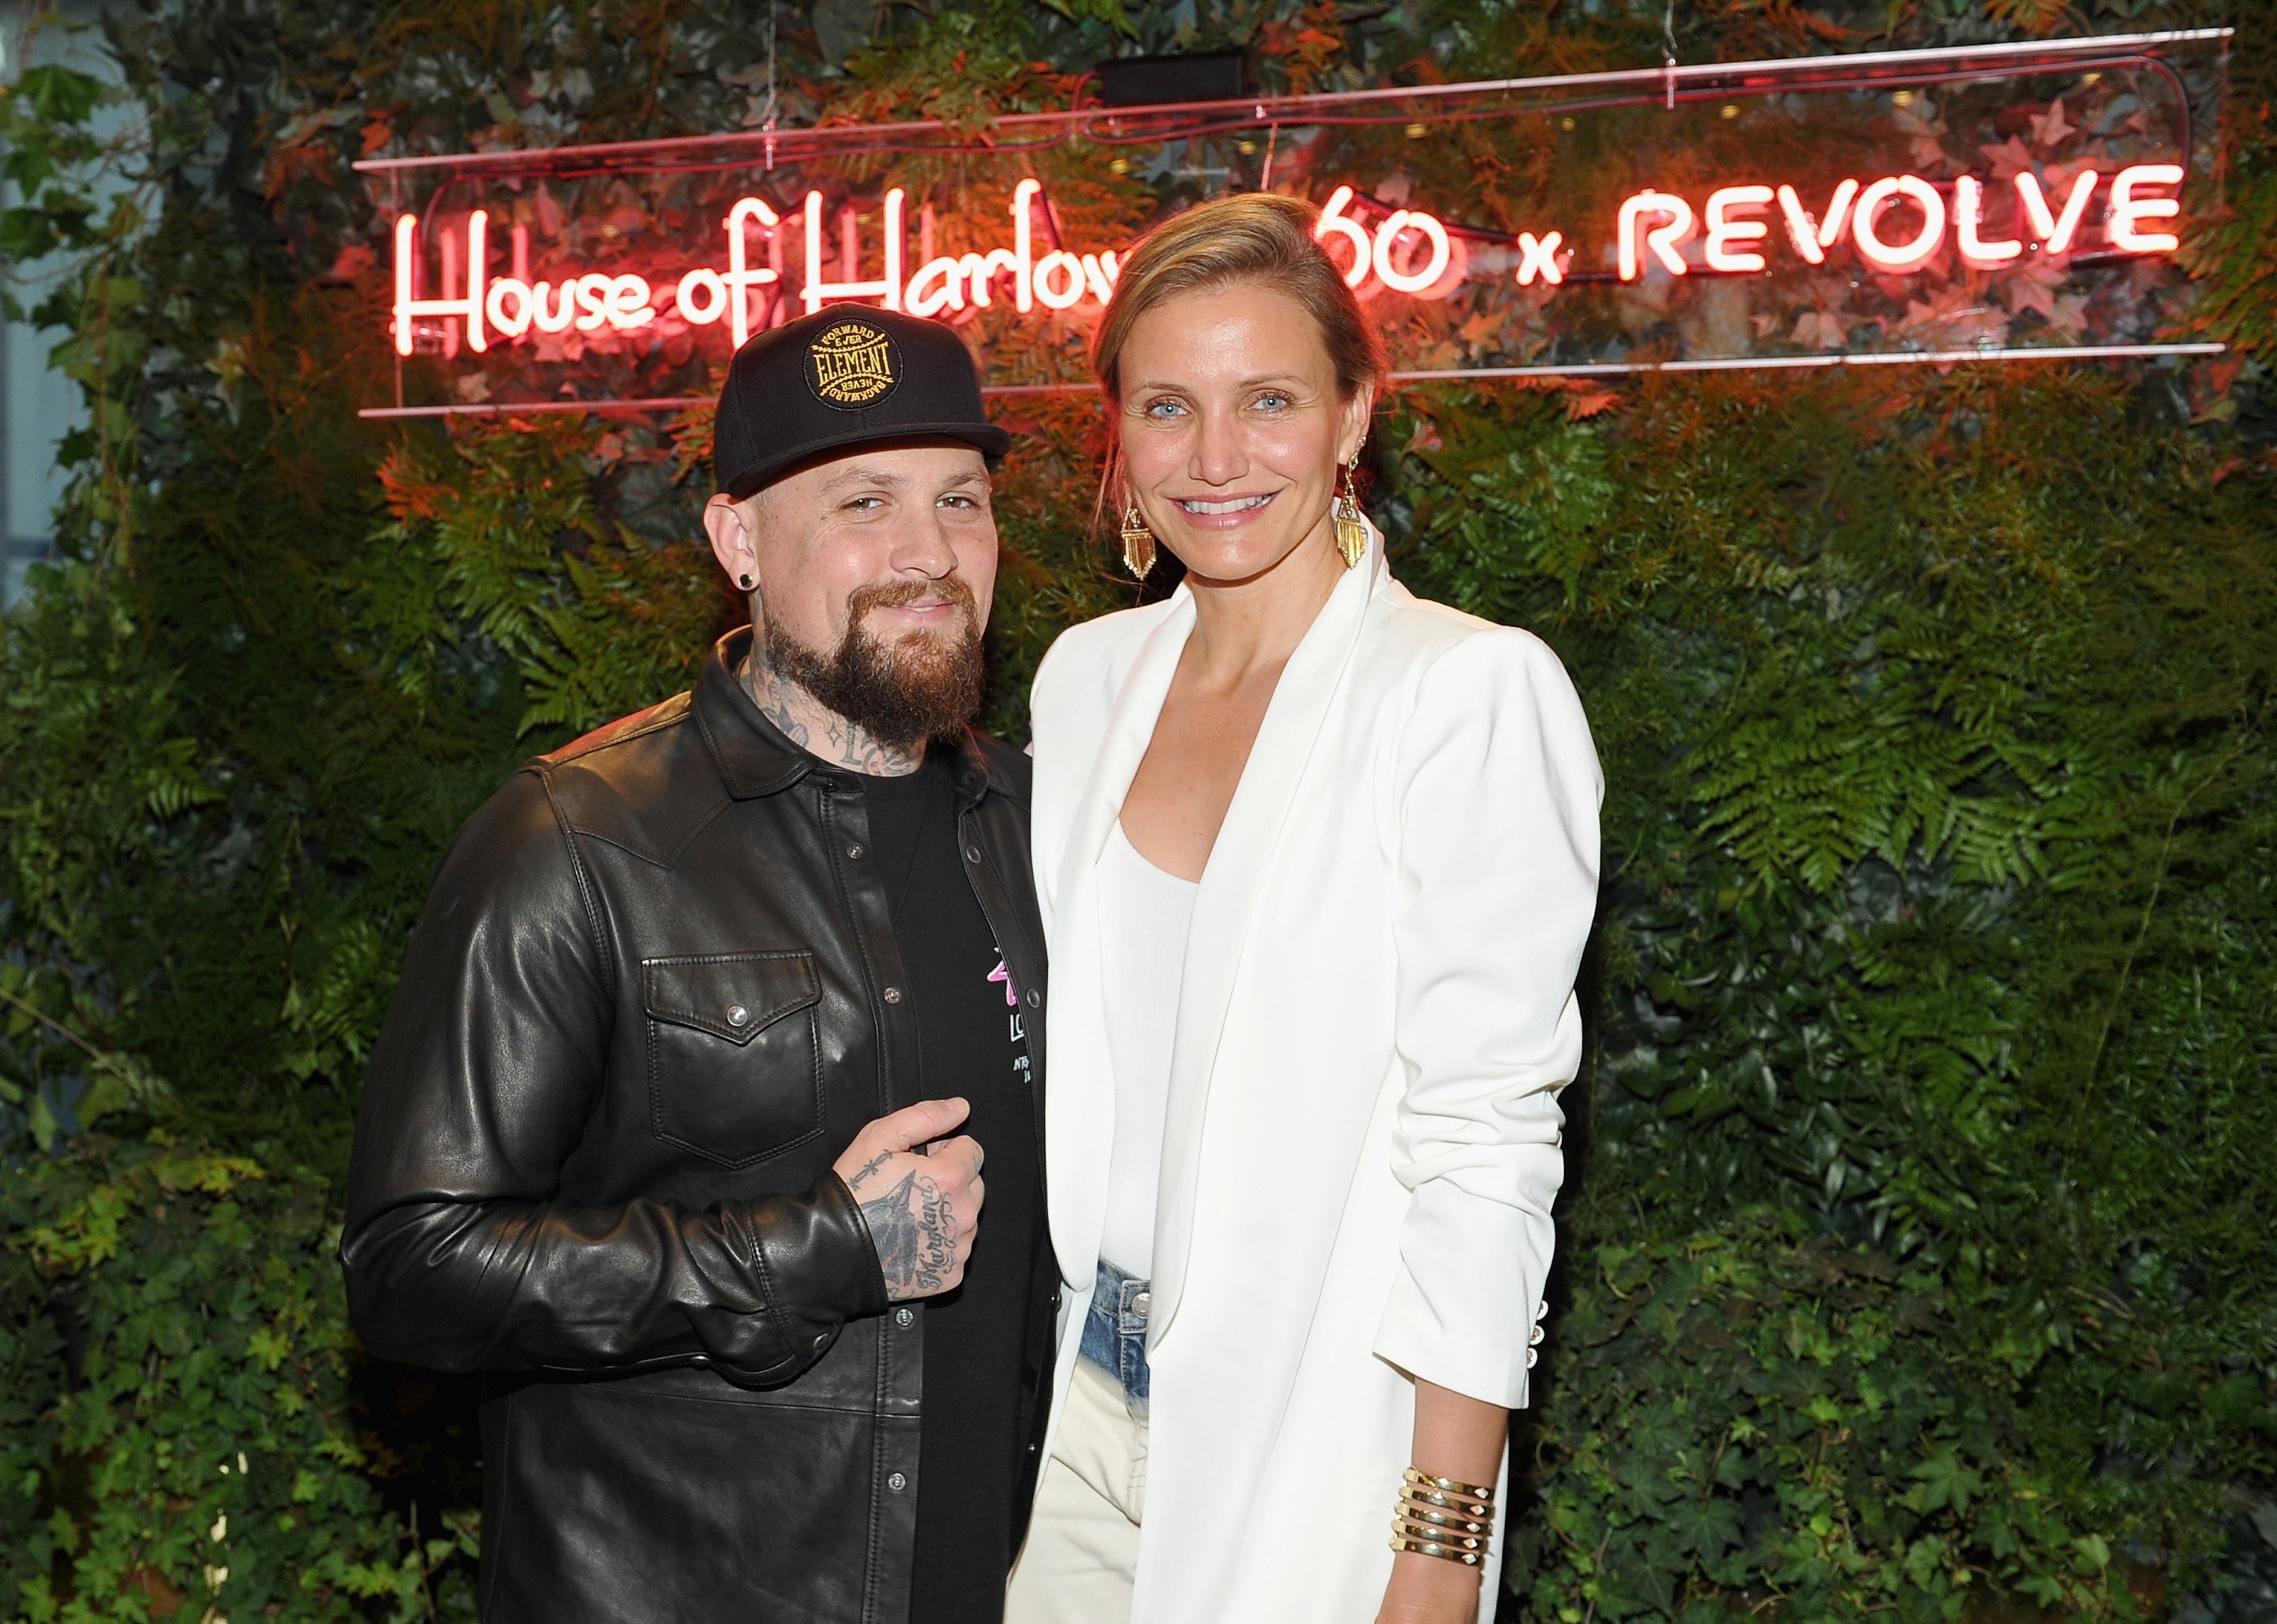 Benji Madden and actress Cameron Diaz attend House of Harlow 1960 x REVOLVE on June 2, 2016, in Los Angeles, California. | Source: Getty Images.